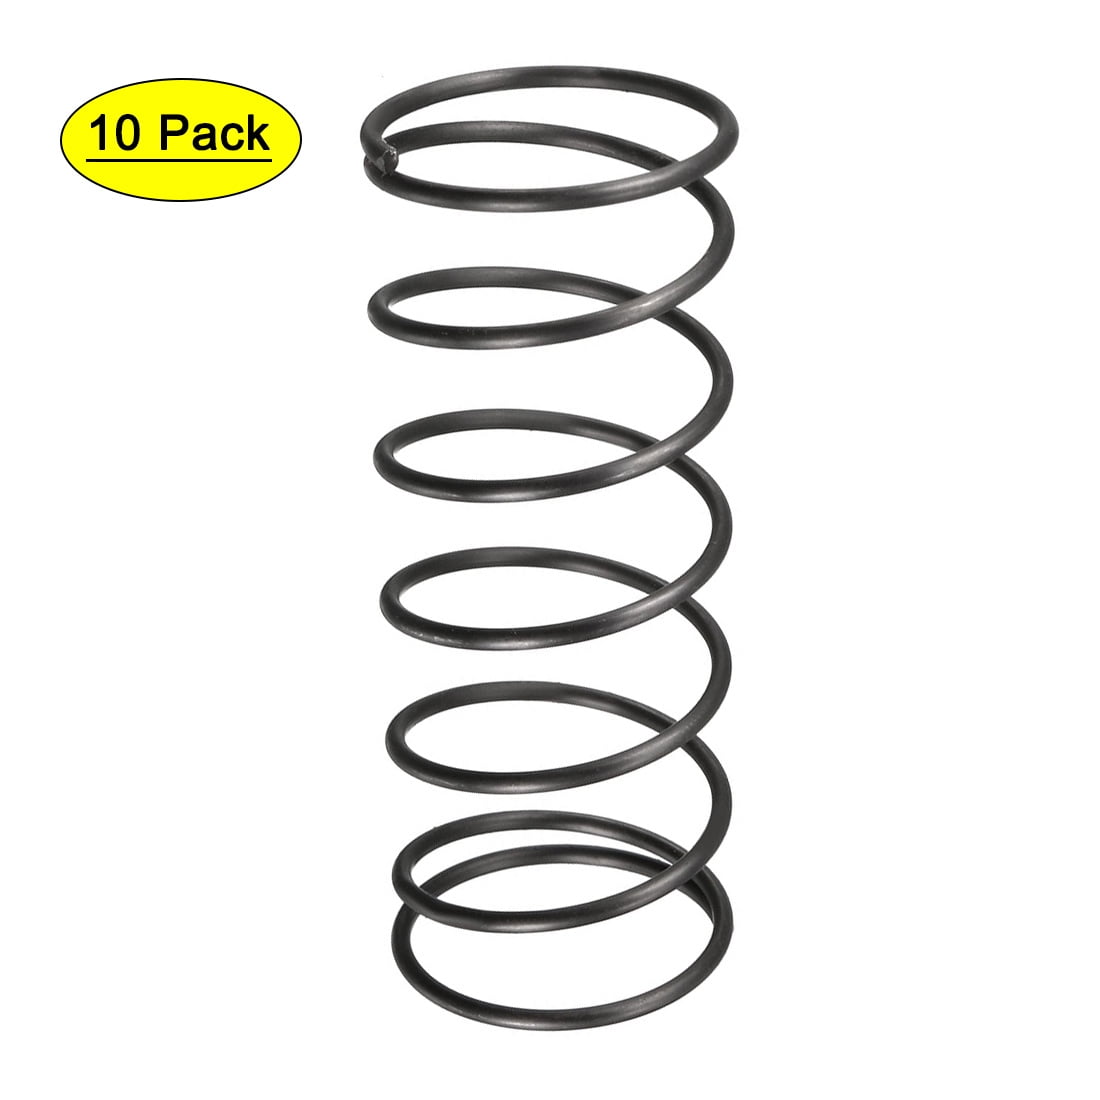 10× 1.2mm Stainless Steel Extension Compression Spring O.D 8-20mm Length 10-50mm 